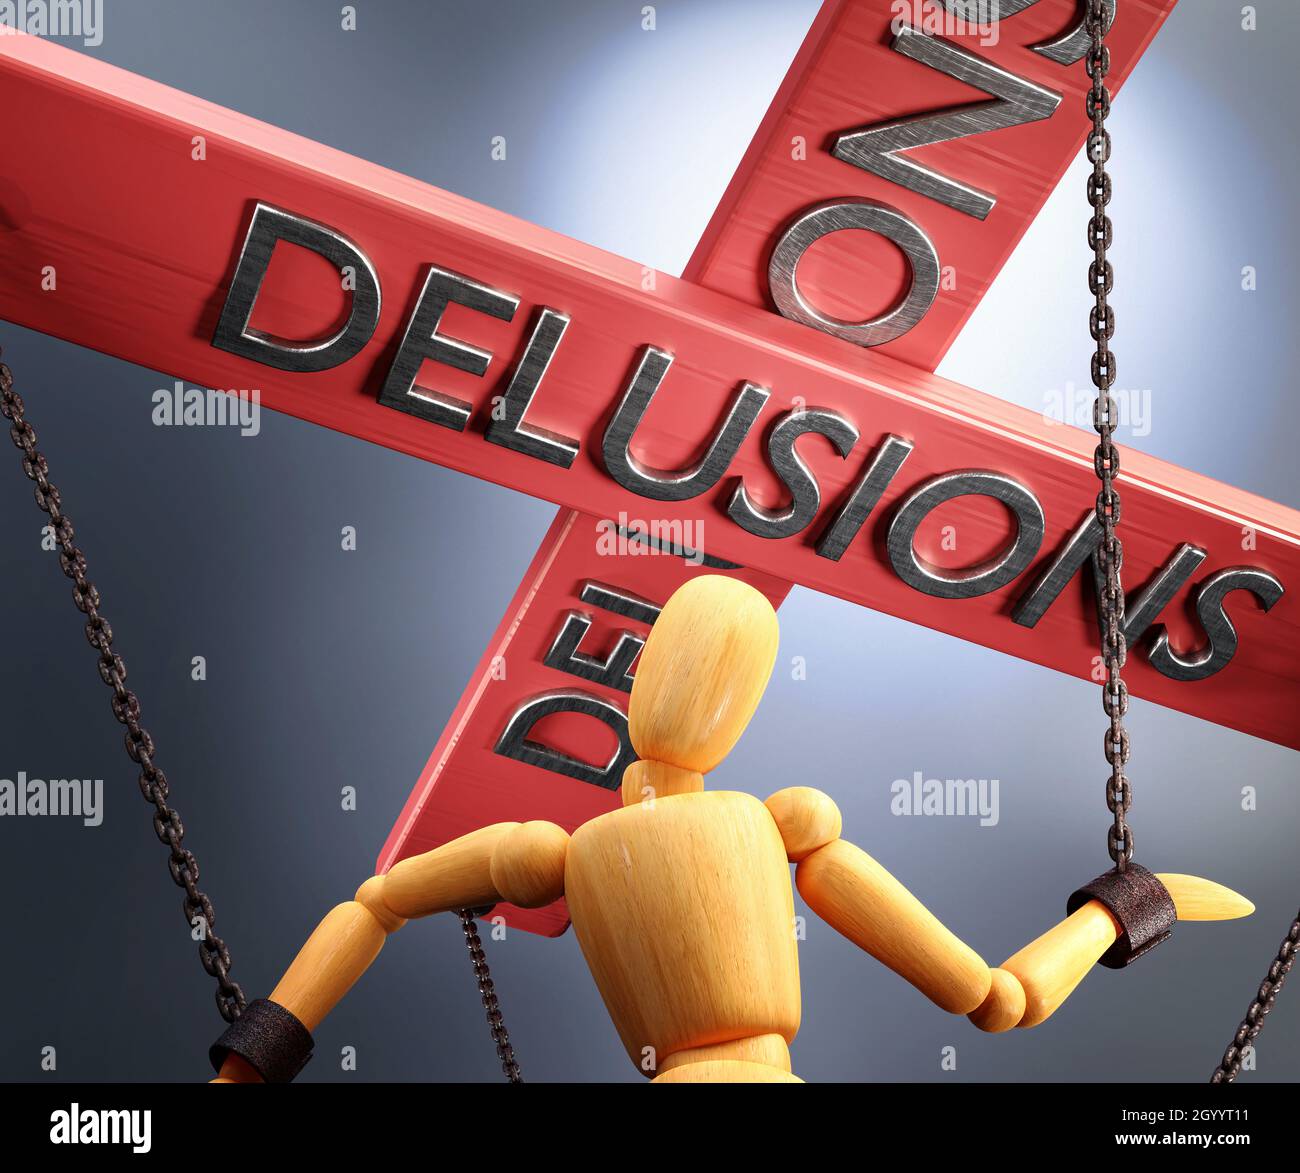 Delusions control, power, authority and manipulation symbolized by control bar with word Delusions pulling the strings (chains) of a wooden puppet, 3d Stock Photo